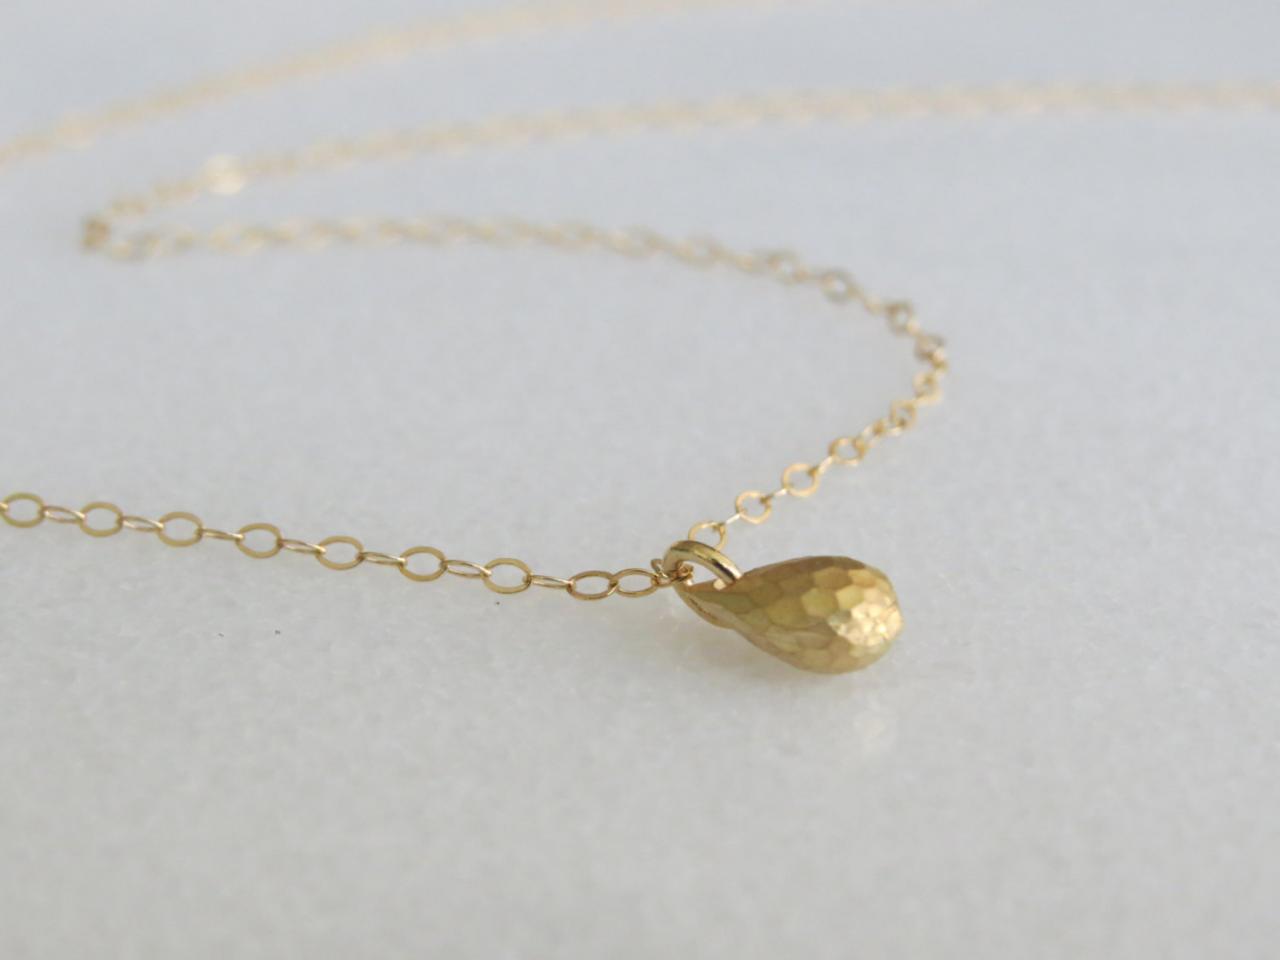 Gold Necklace - Tiny Drop Necklace, Gold Drop Necklace, Simple Small Drop Necklace, Gold Jewelry, Dainty Gold Necklace